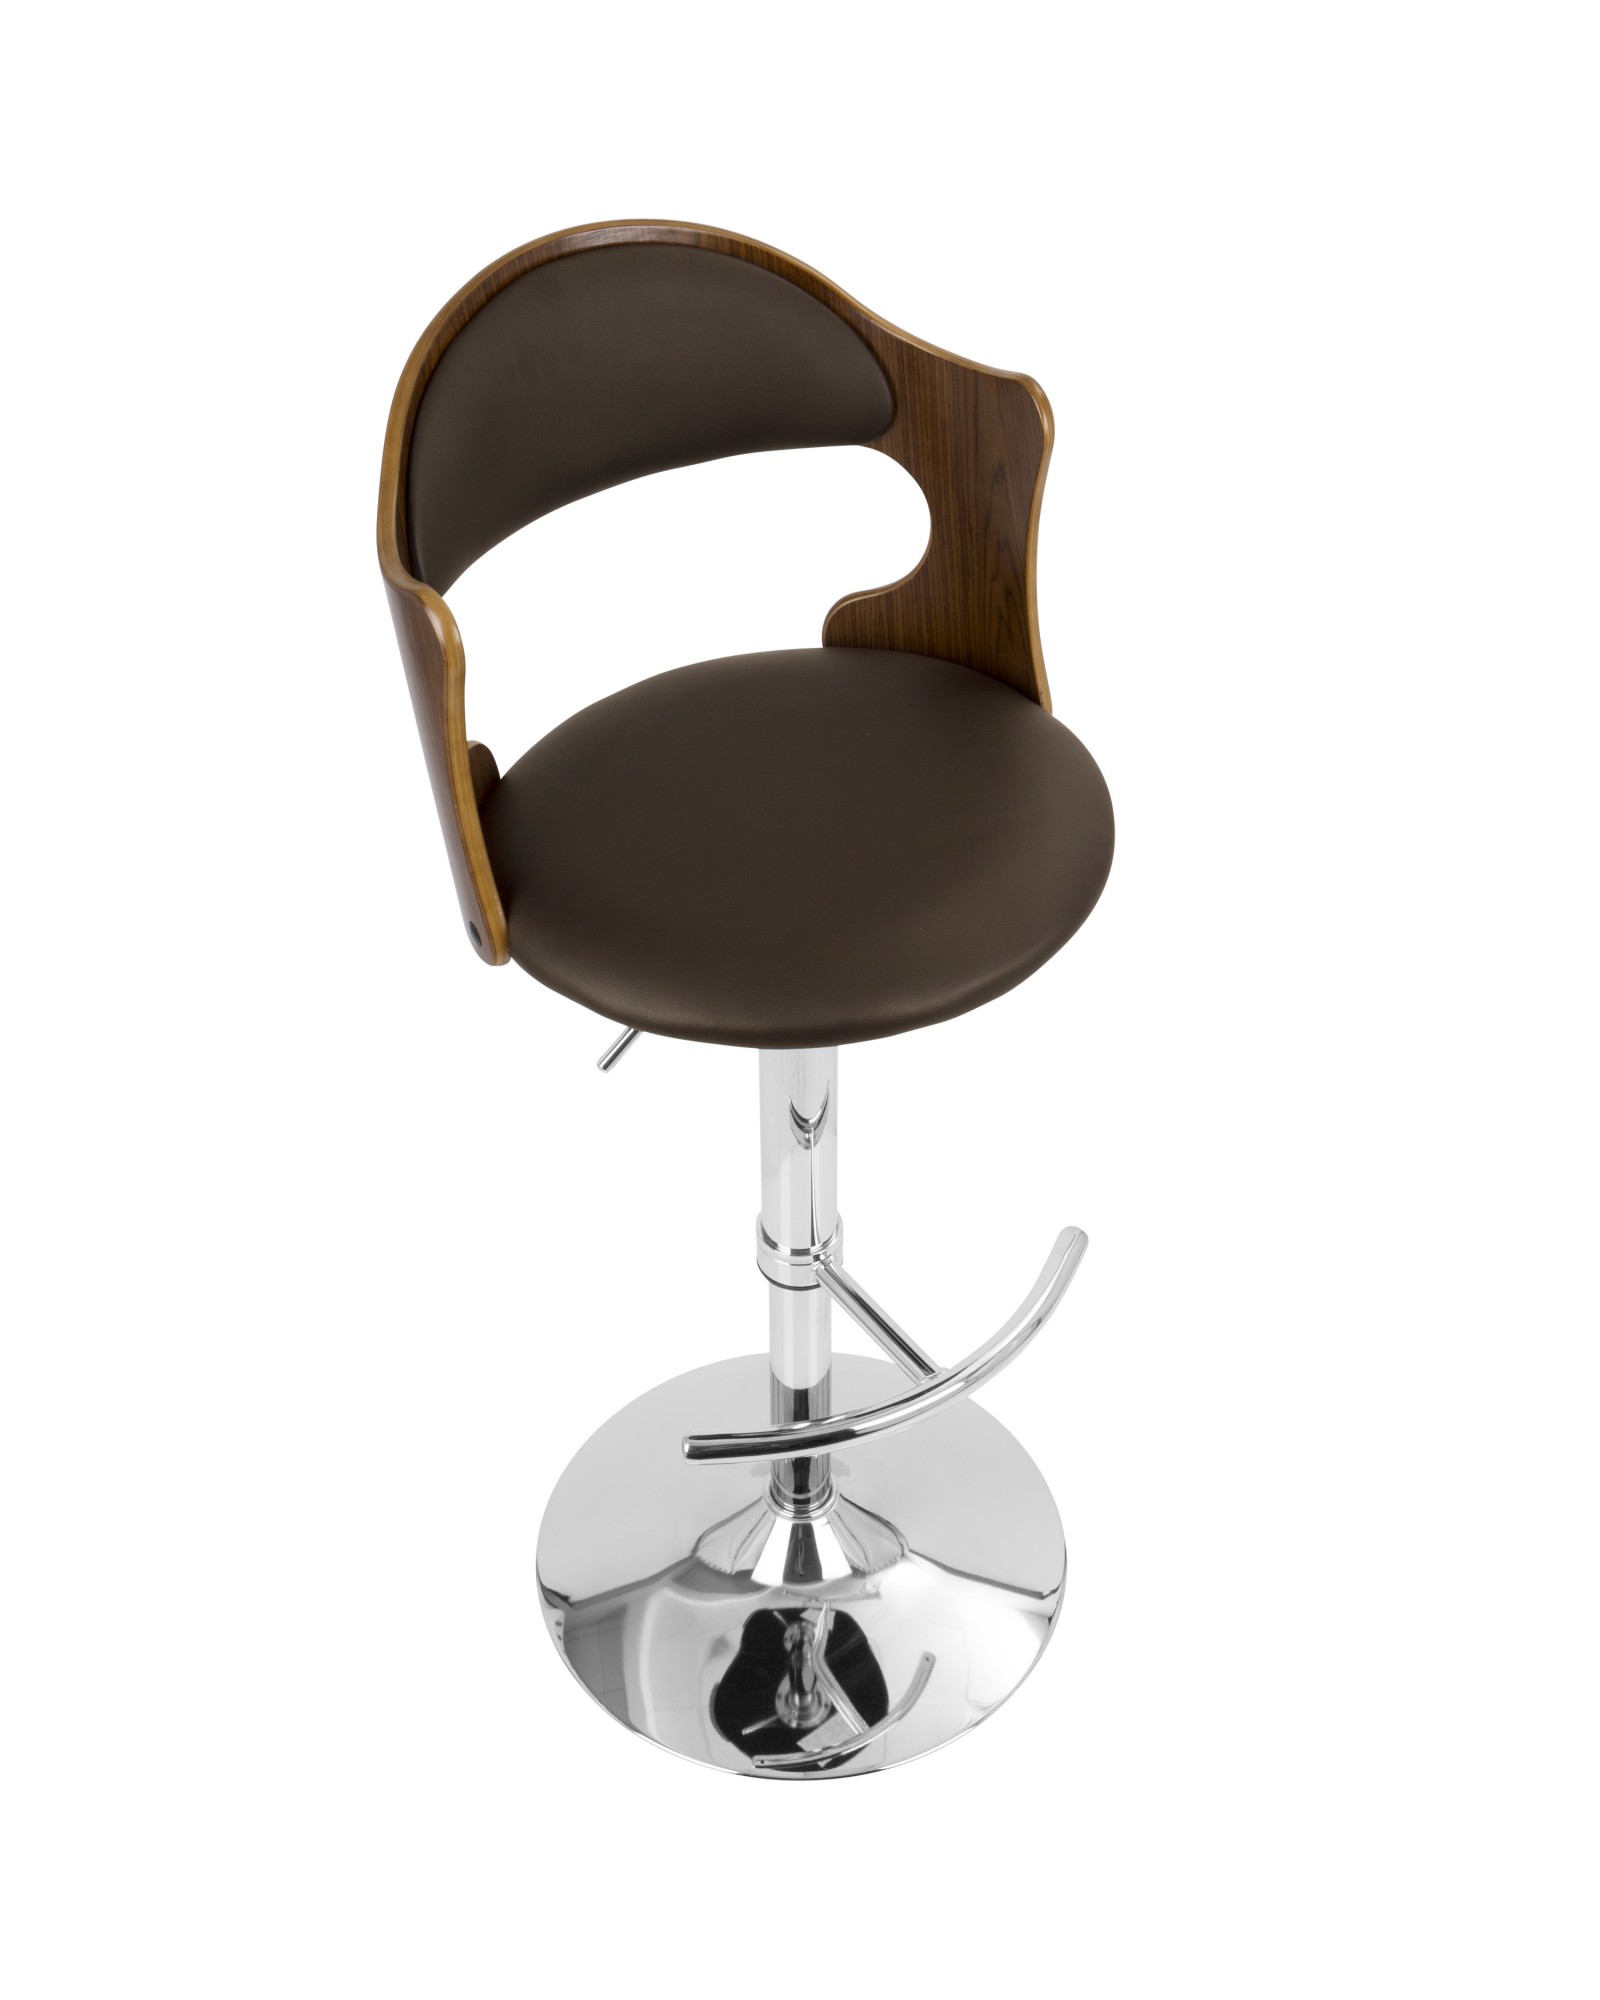 Cello Mid-Century Modern Adjustable Barstool with Swivel in Walnut and Brown Faux Leather